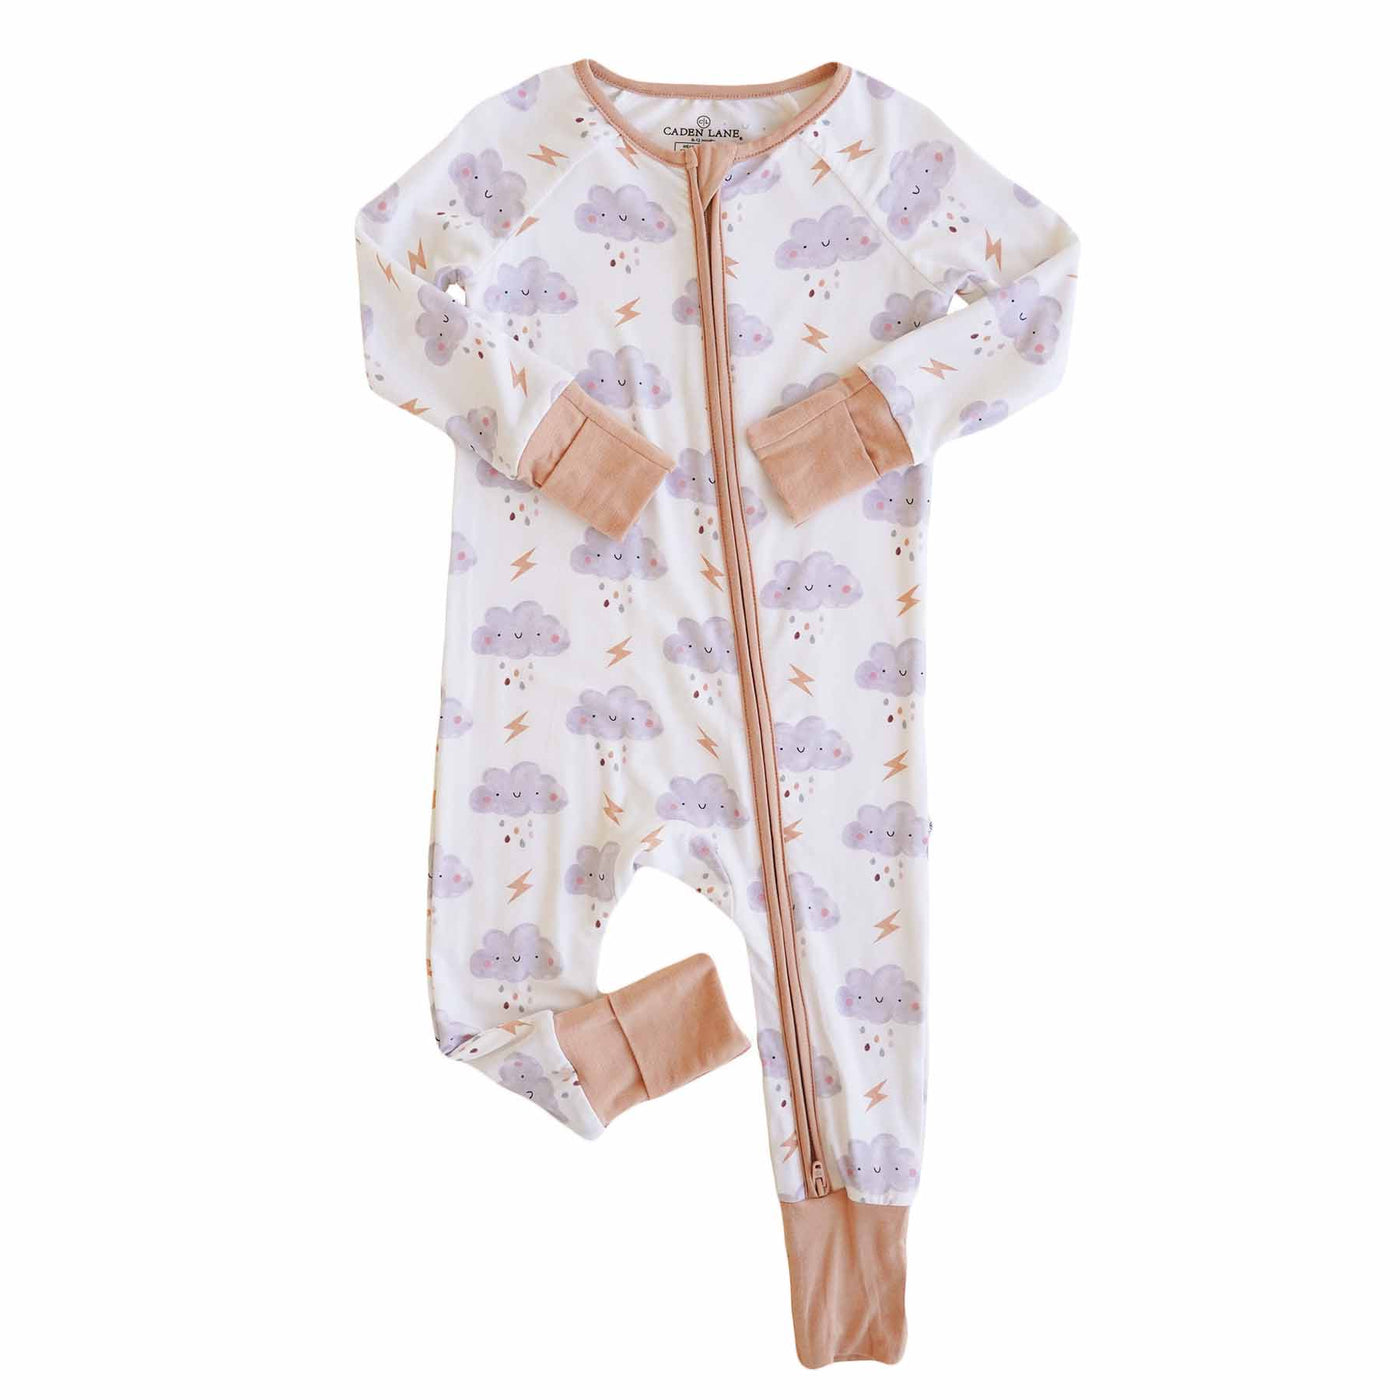 cloudy cuddles convertible zip romper for babies 